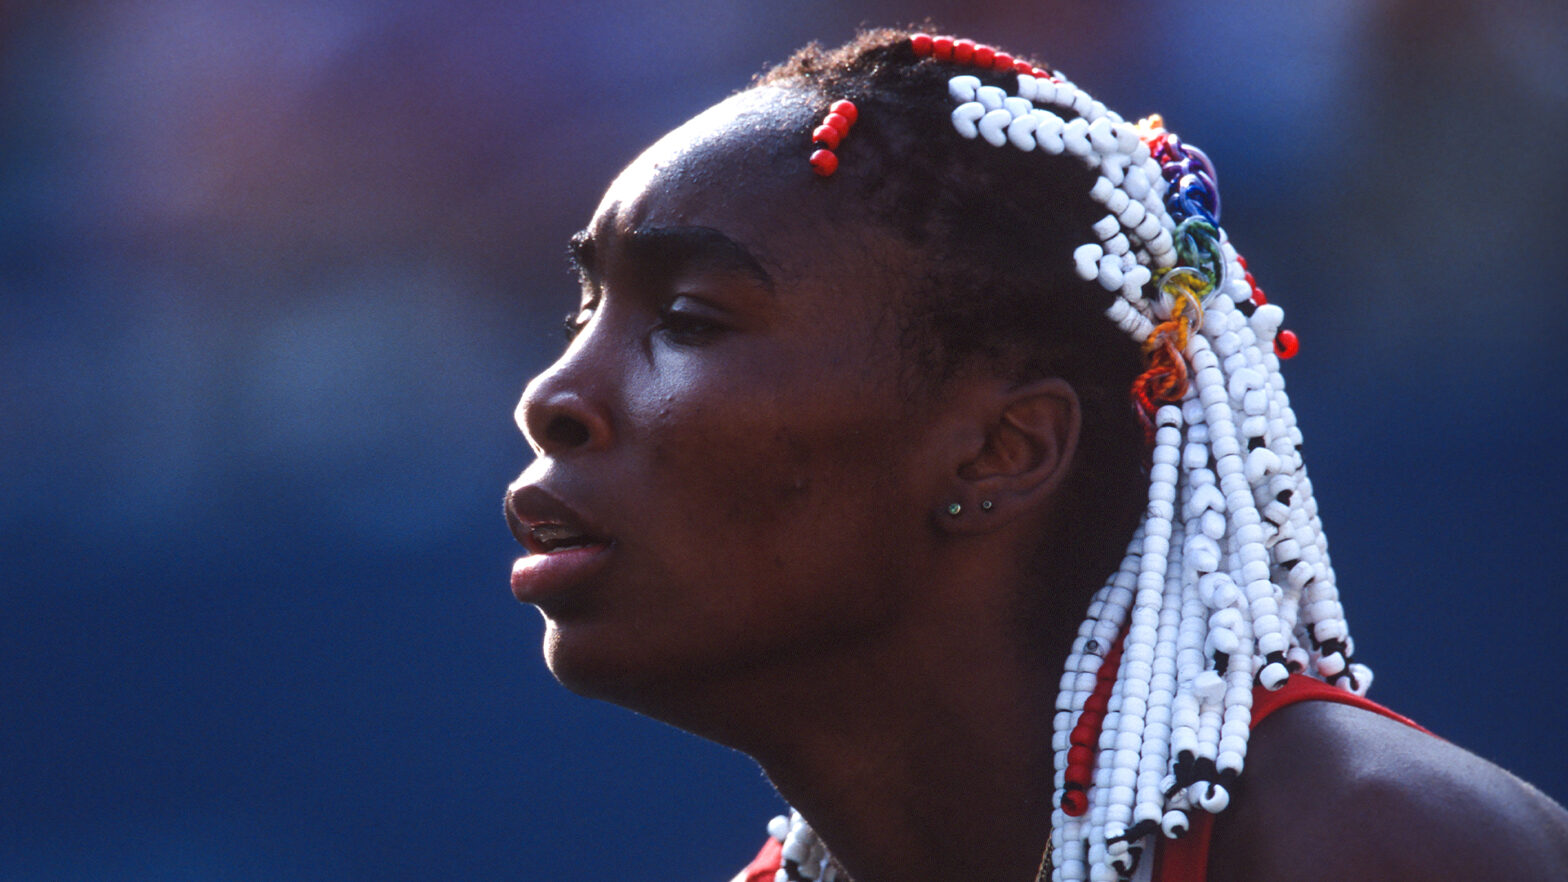 Venus Williams Signed A Reported $12M Reebok Deal When She Was Only 15 Years Old